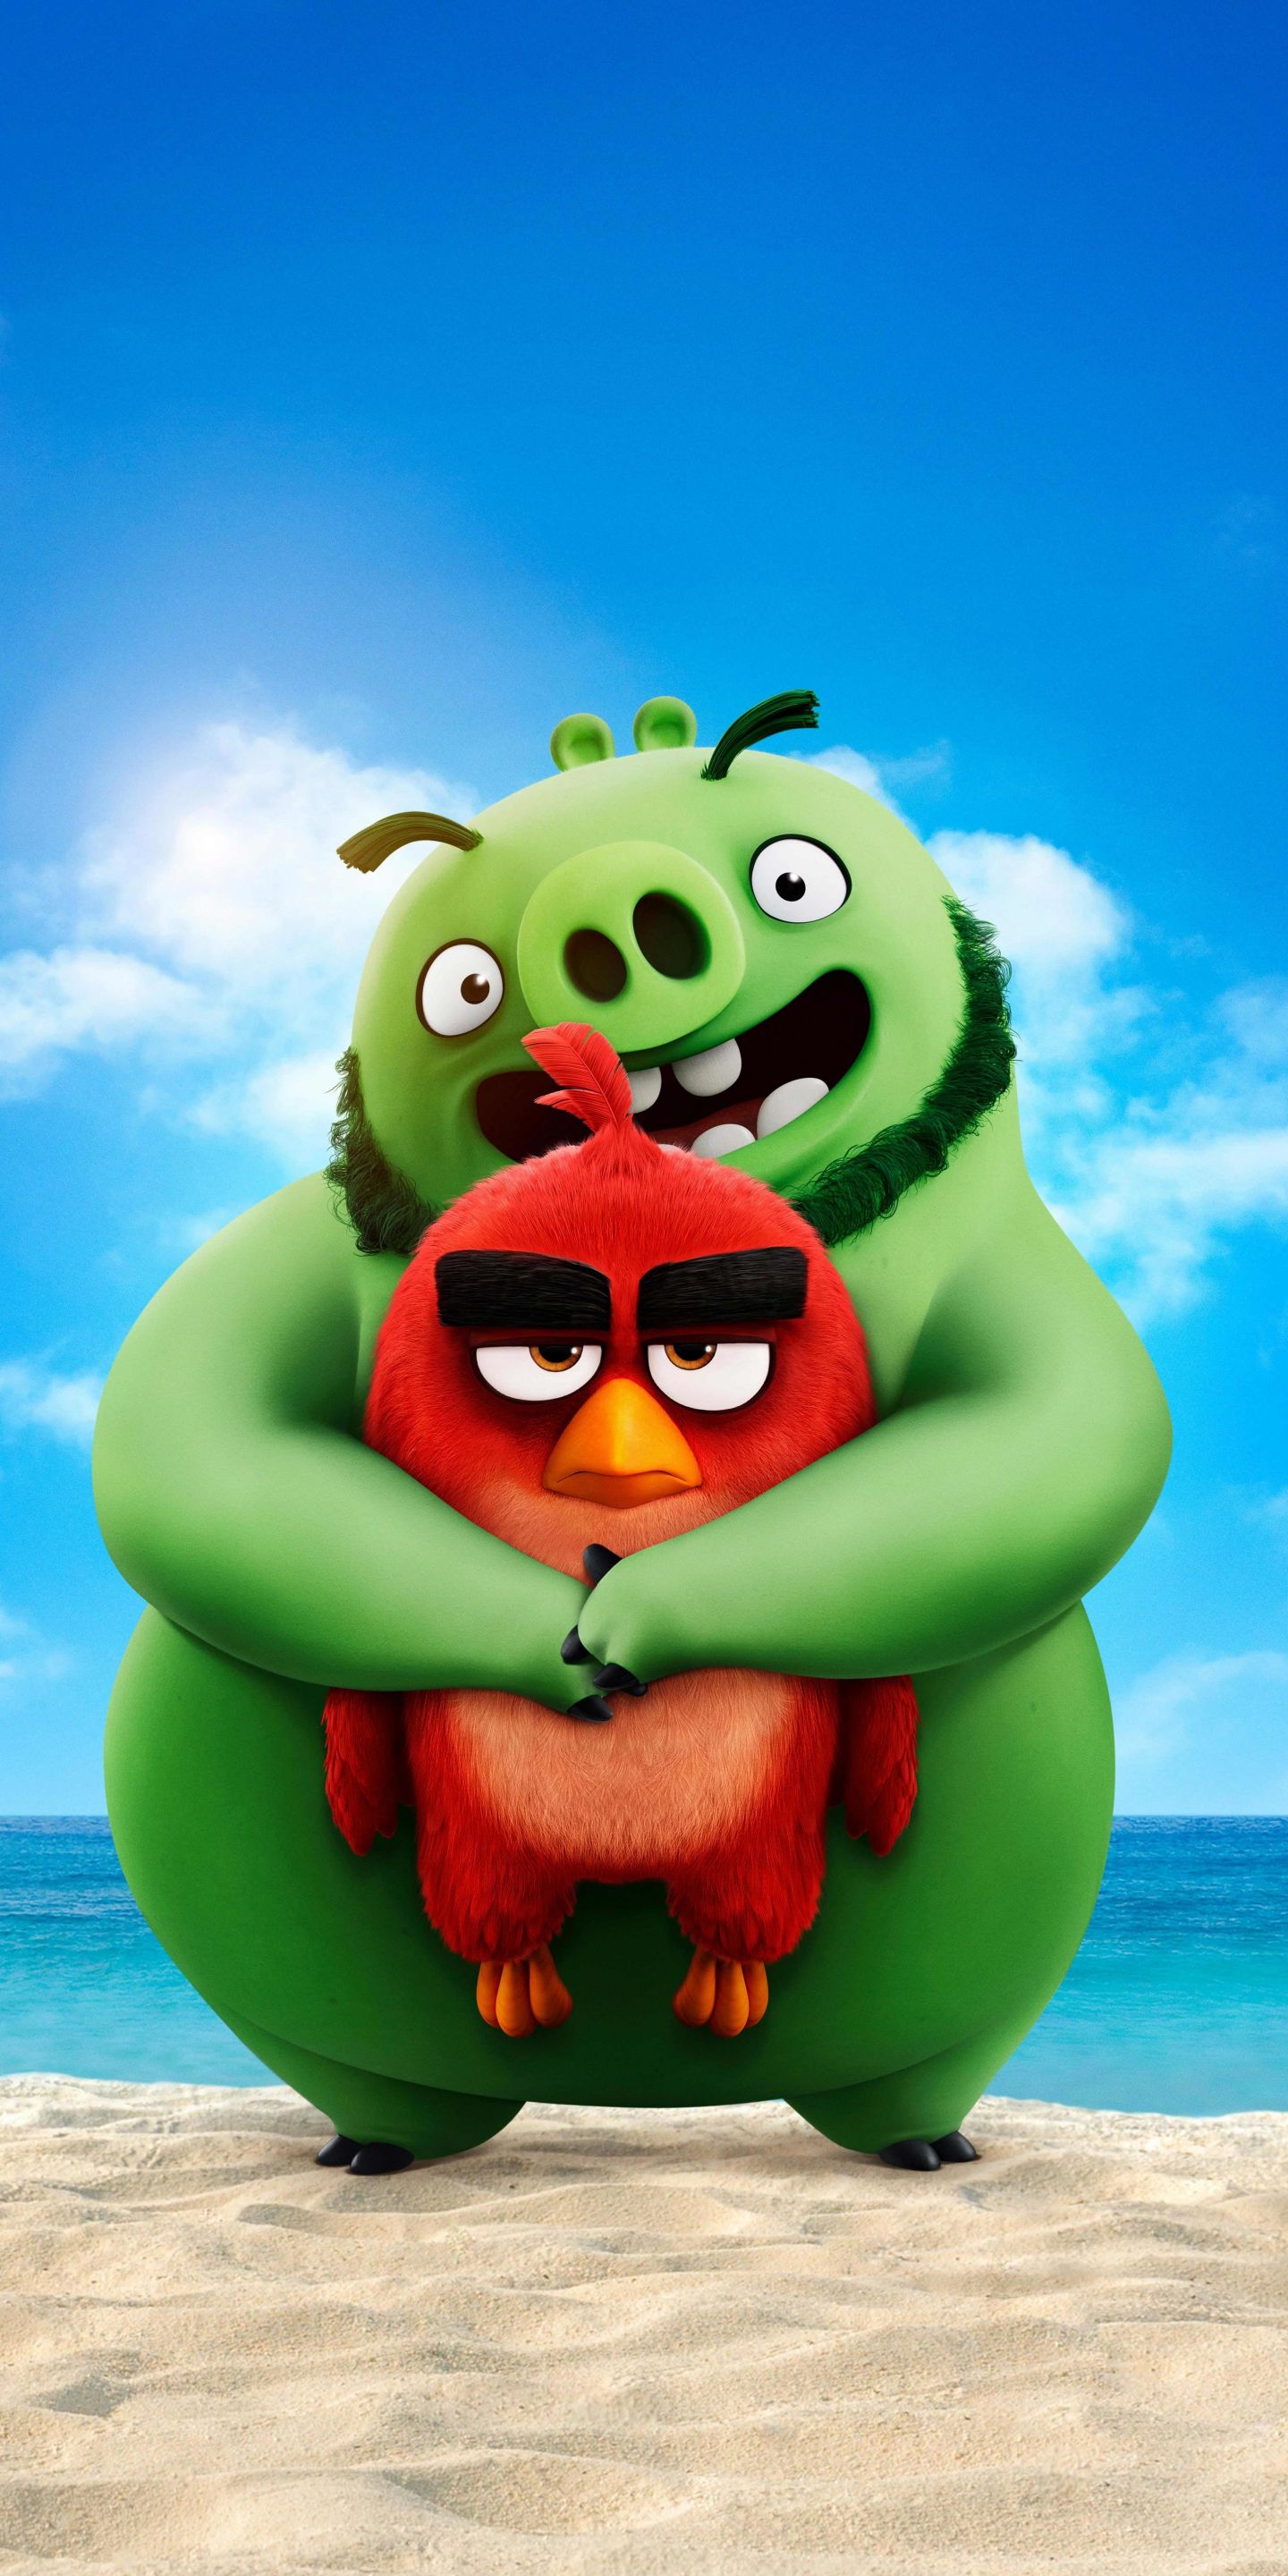 Download wallpaper 1440x2880 movie, piggy and birdy, the angry birds movie lg v lg g 1440x2880 HD background, 22103